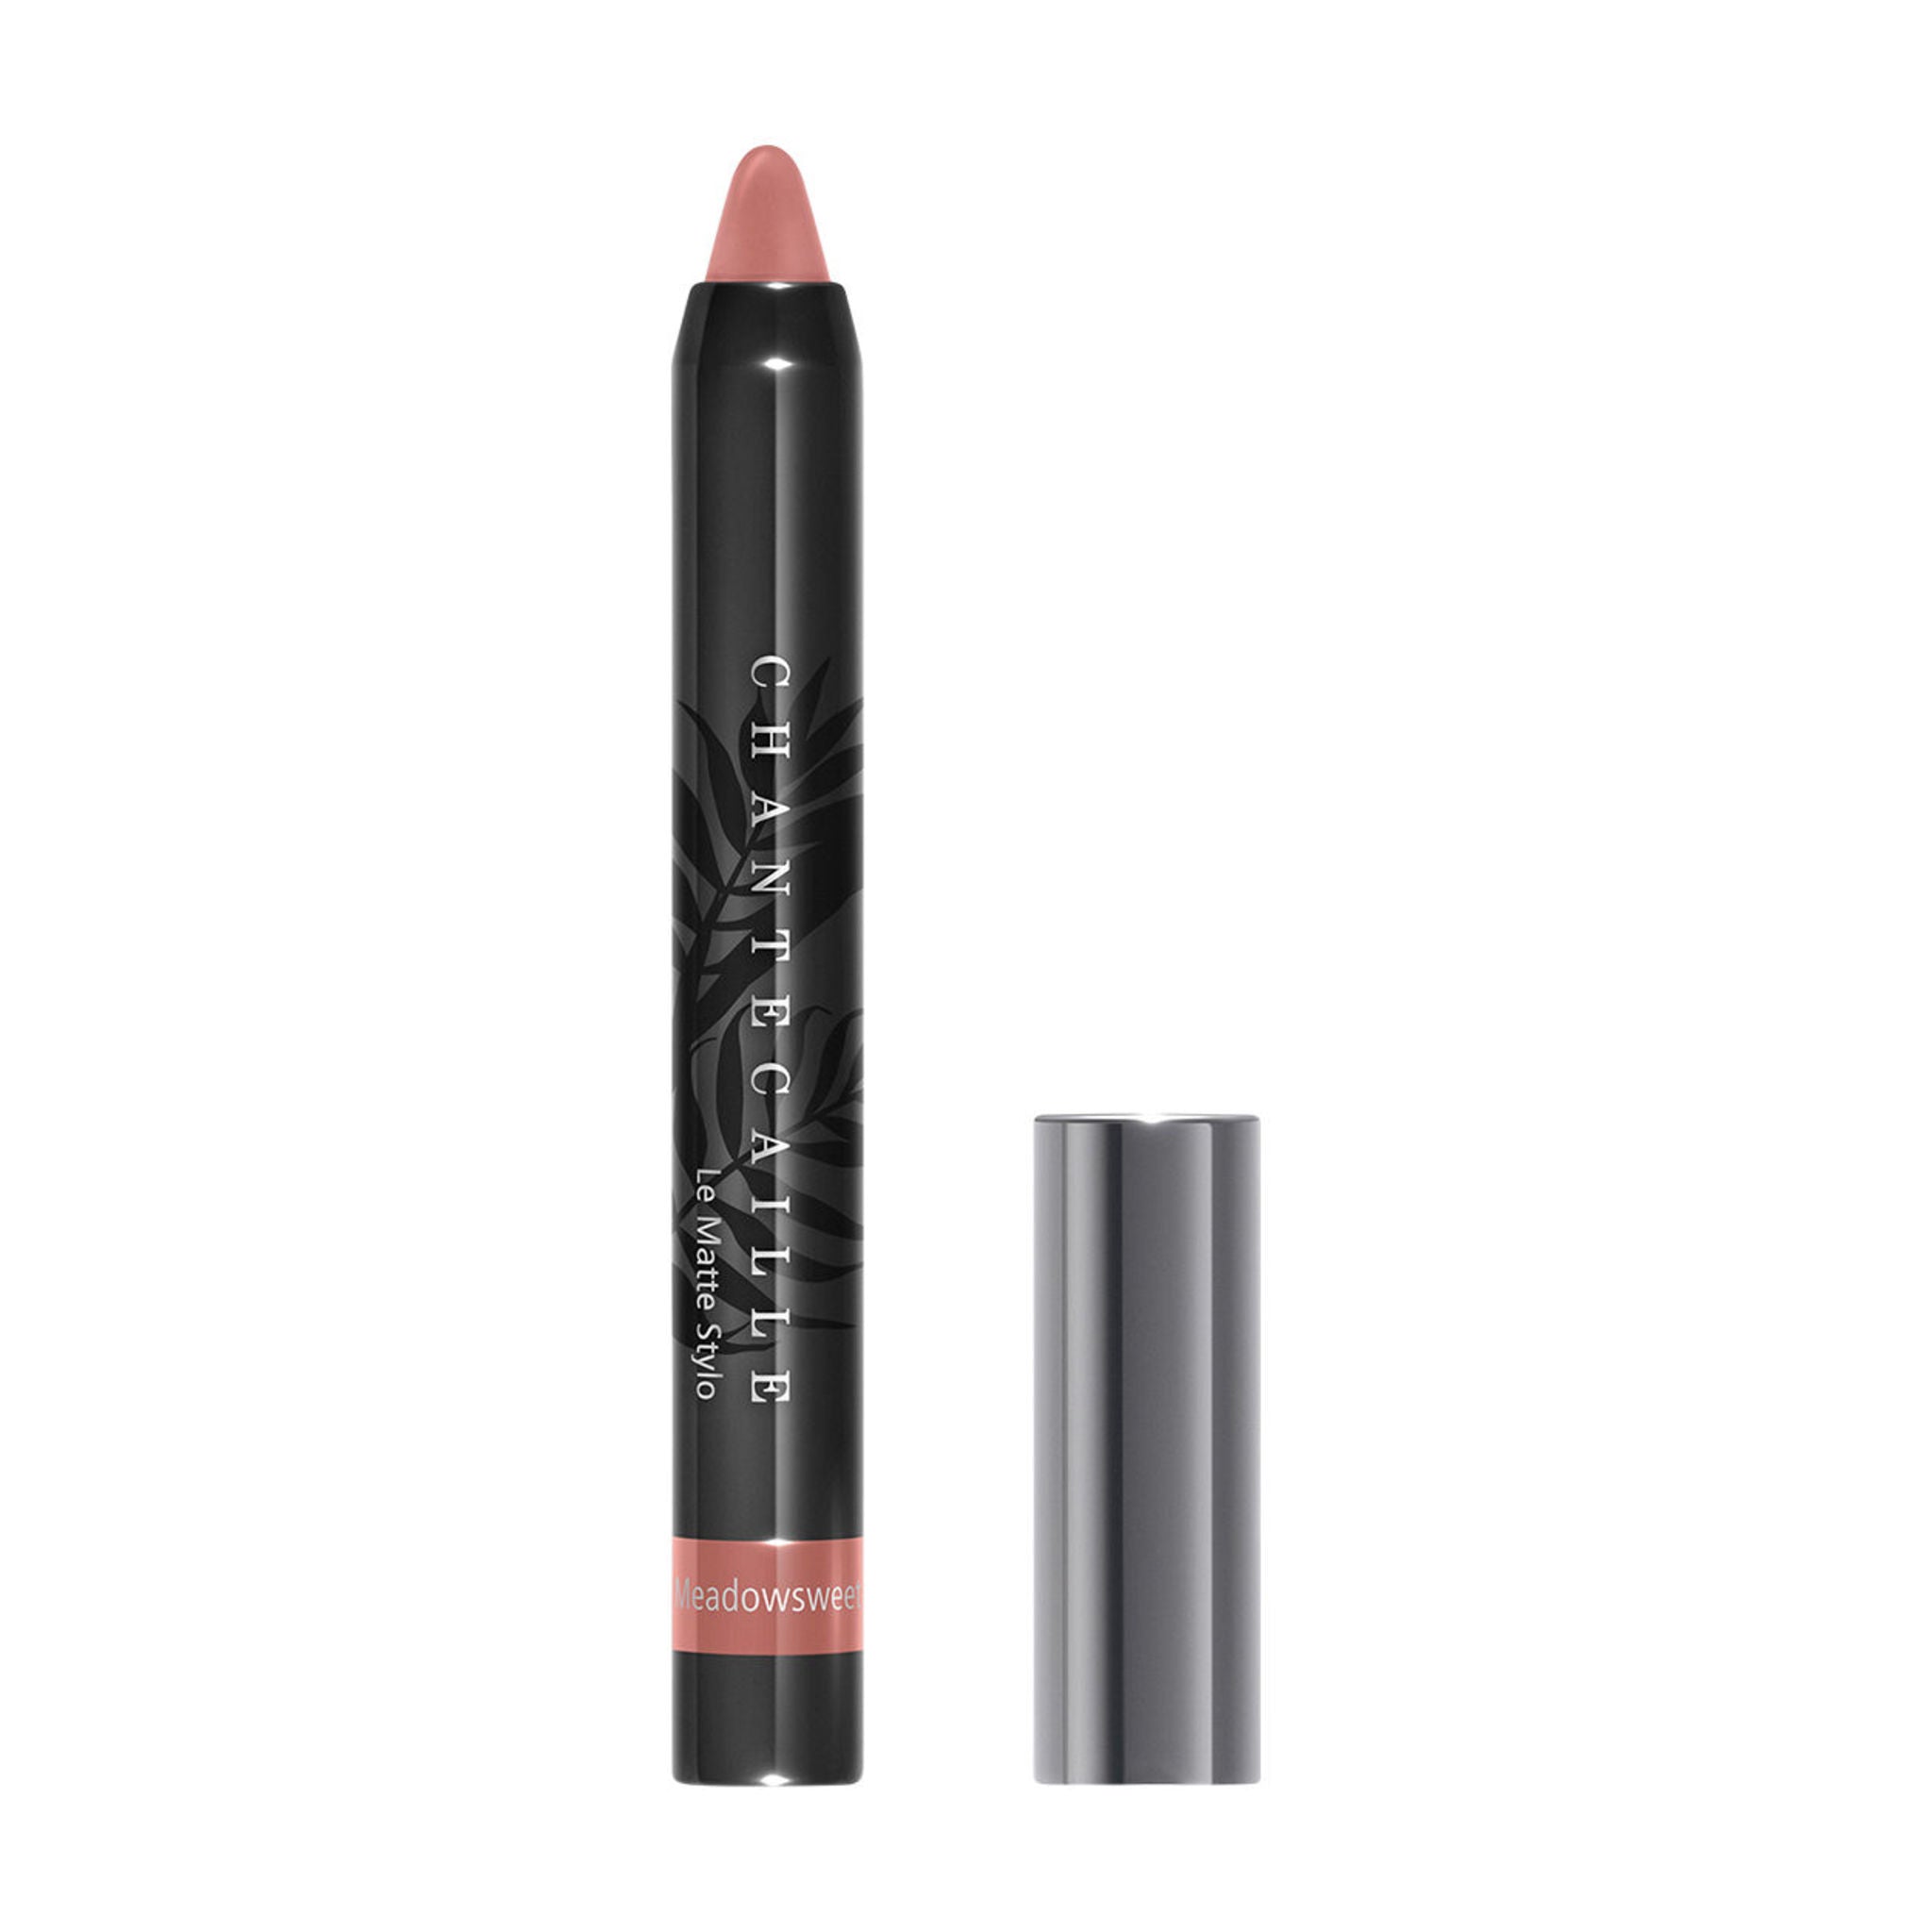 Limited edition Chantecaille Le Matte Stylo Color/Shade variant: Meadowsweet main image. This product is in the color pink